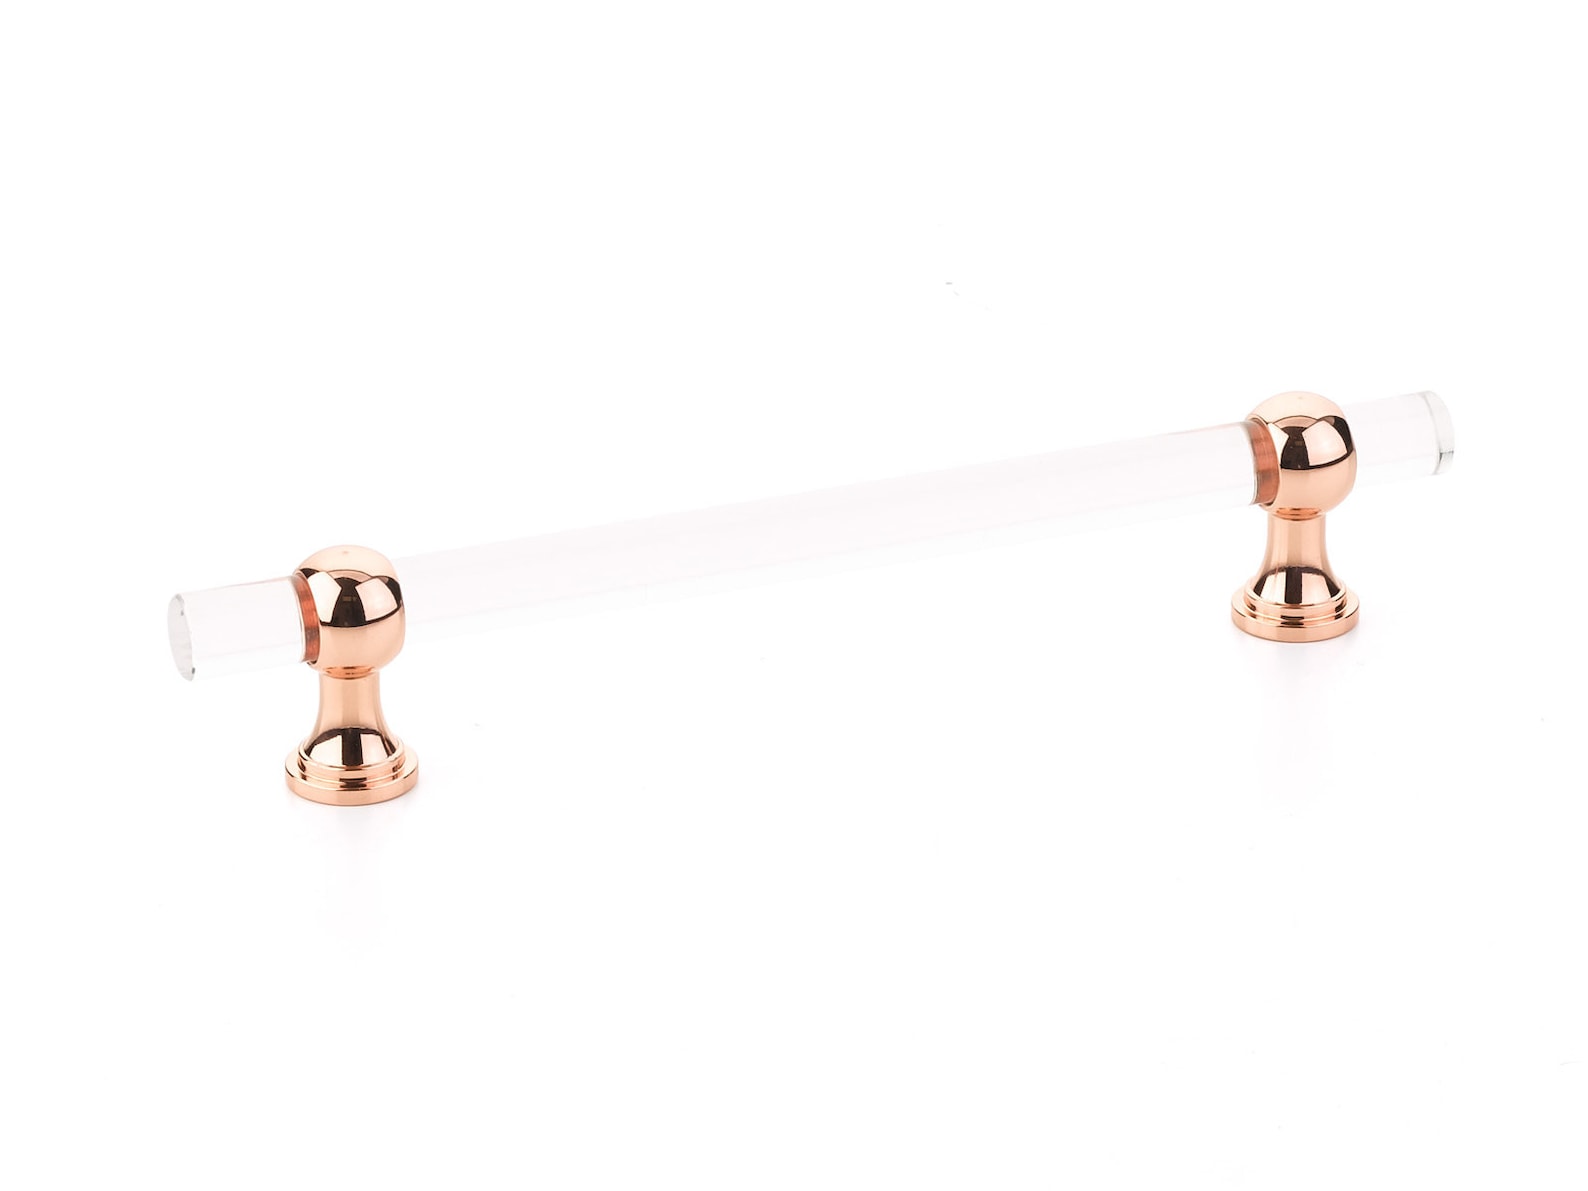 Polished Copper and Lucite "Gleam" Cabinet Knobs and Drawer Pulls (Adjustable) - Forge Hardware Studio